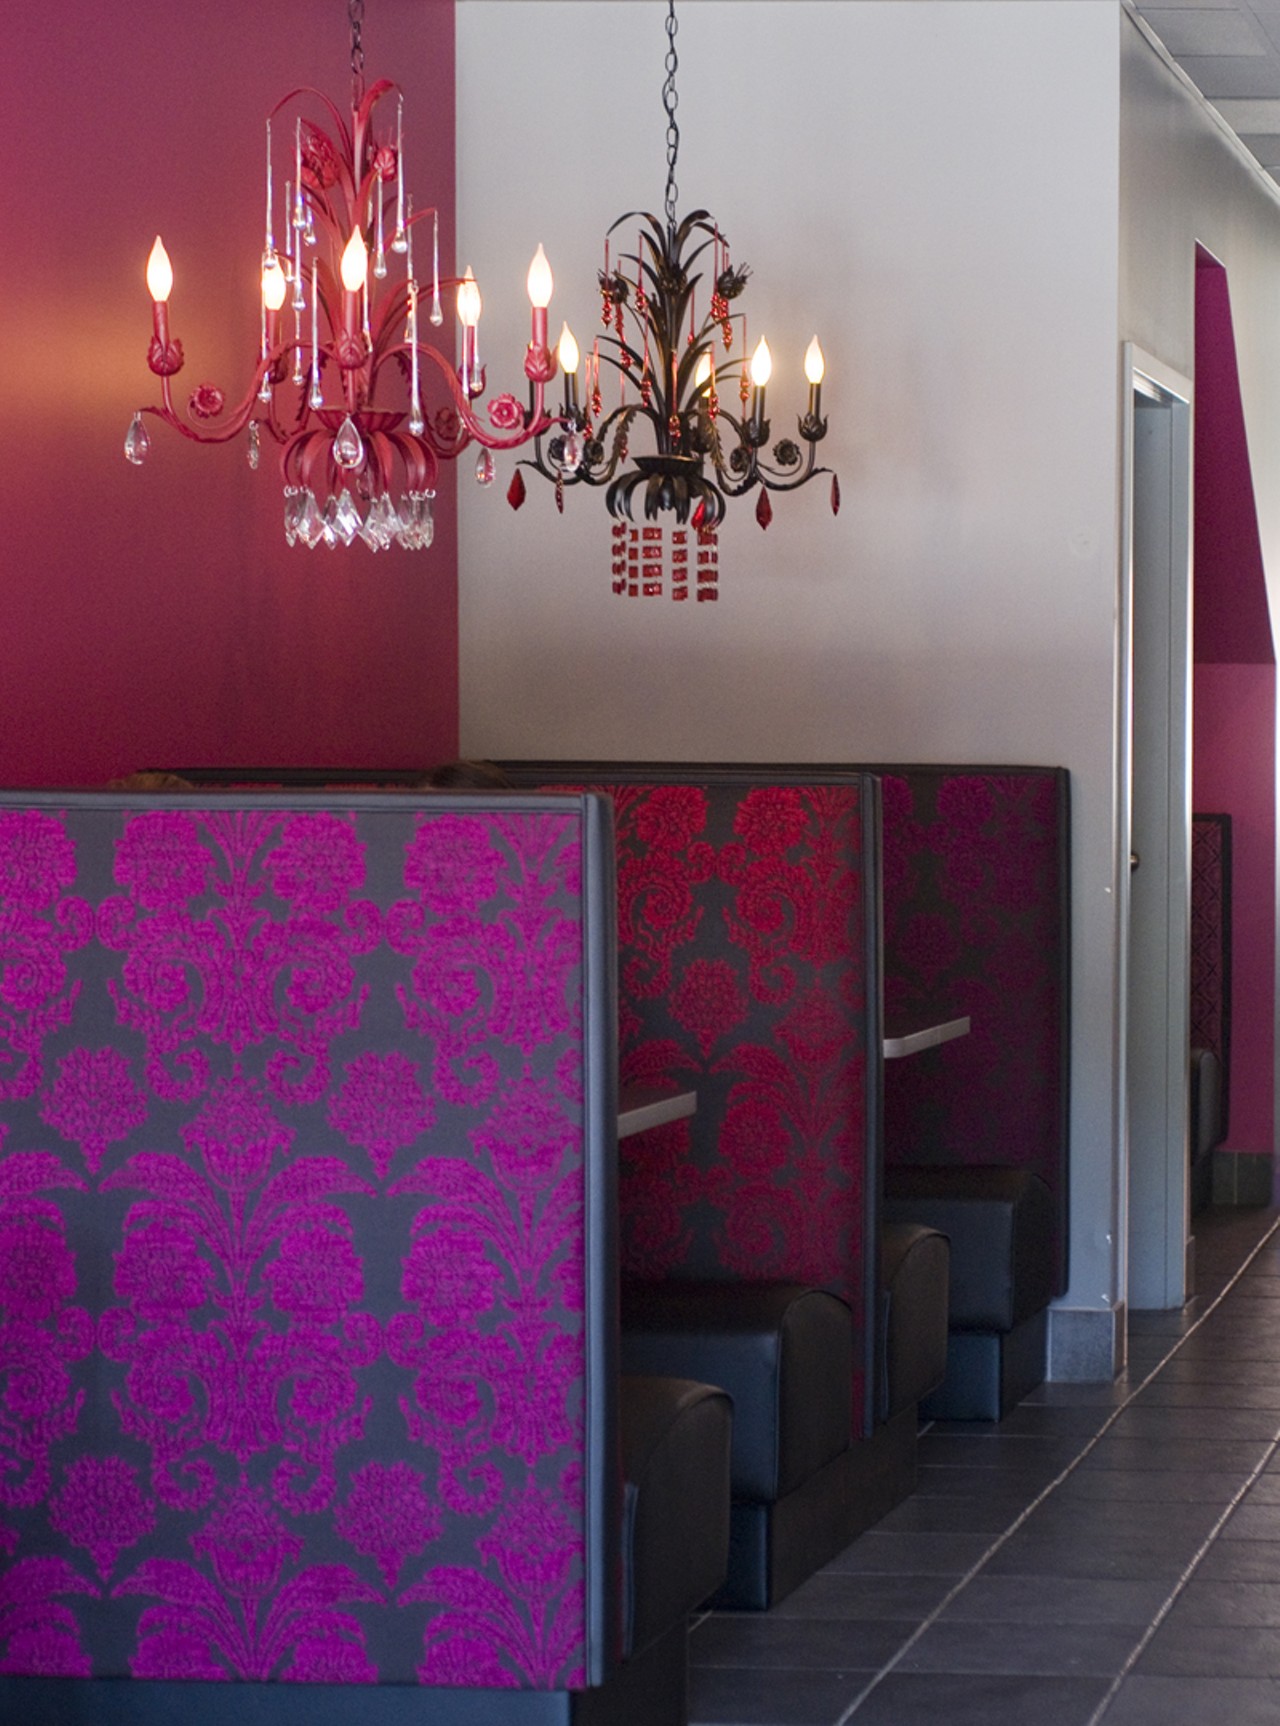 Caf&eacute; Mochi's hip interior, its booths covered in hot-pink brocade woven fabrics.